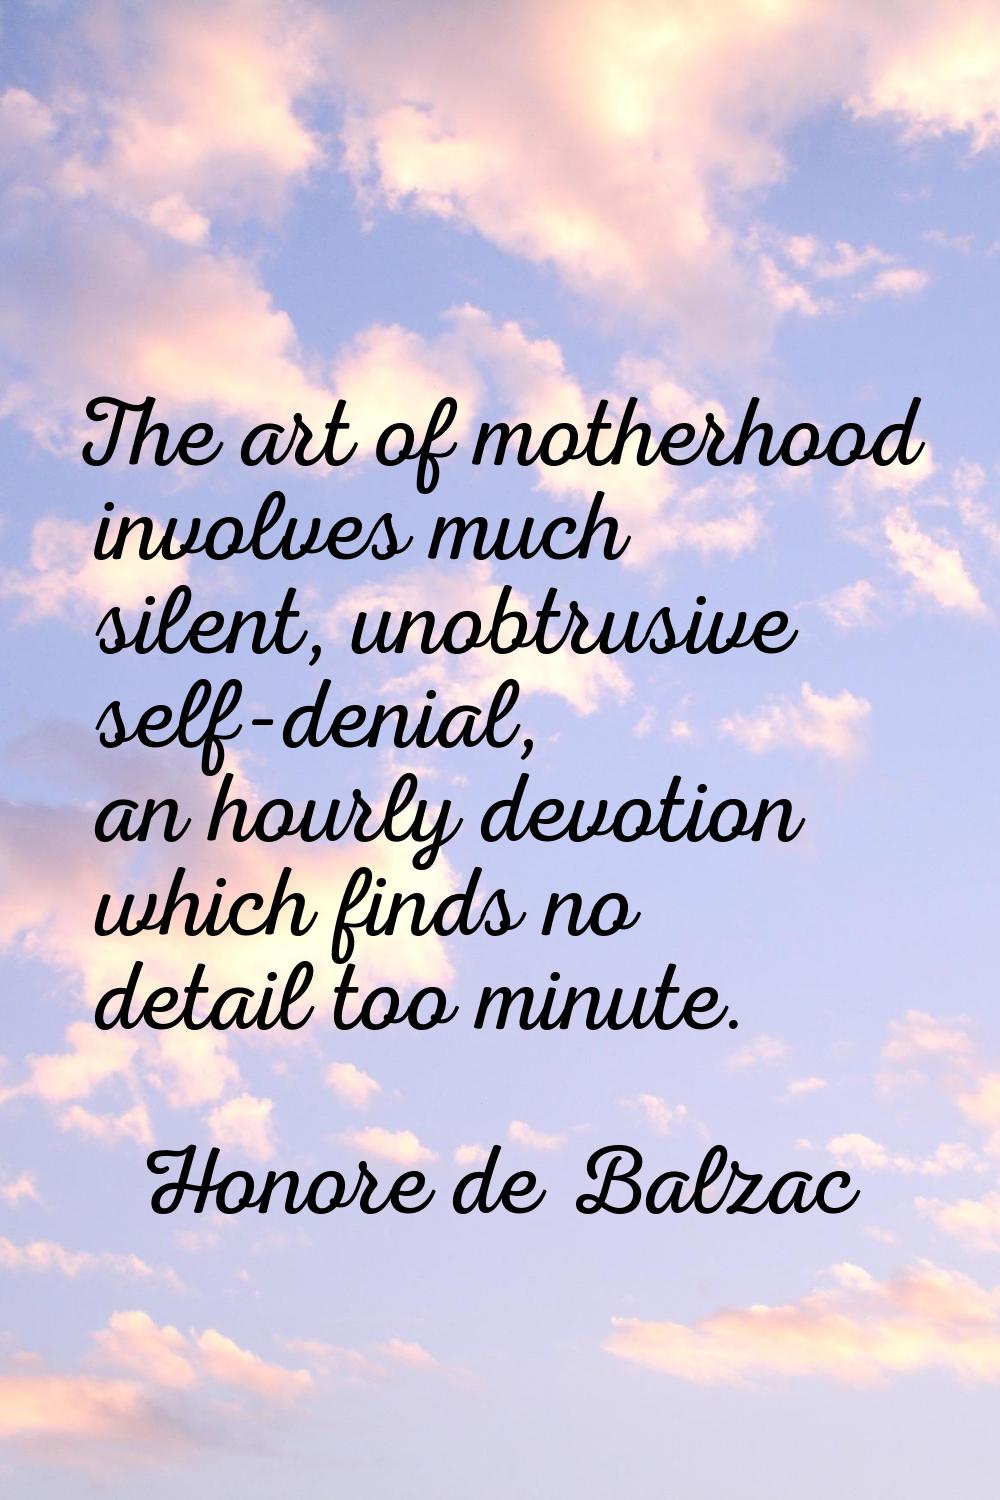 The art of motherhood involves much silent, unobtrusive self-denial, an hourly devotion which finds